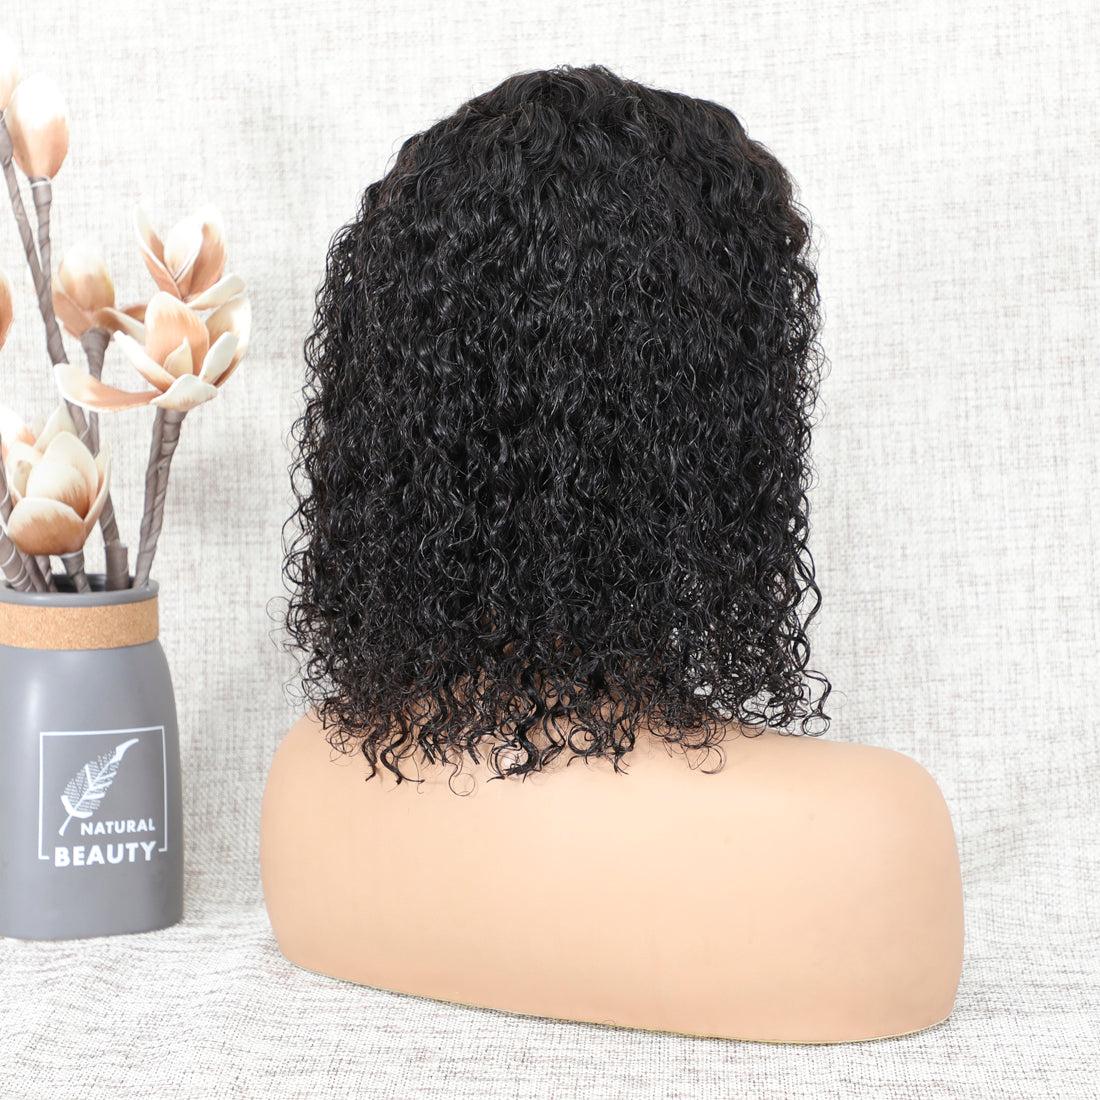 Short Deep Curly Lace Closure Human Hair Wigs Remy Brazilian Curly Hair Wigs